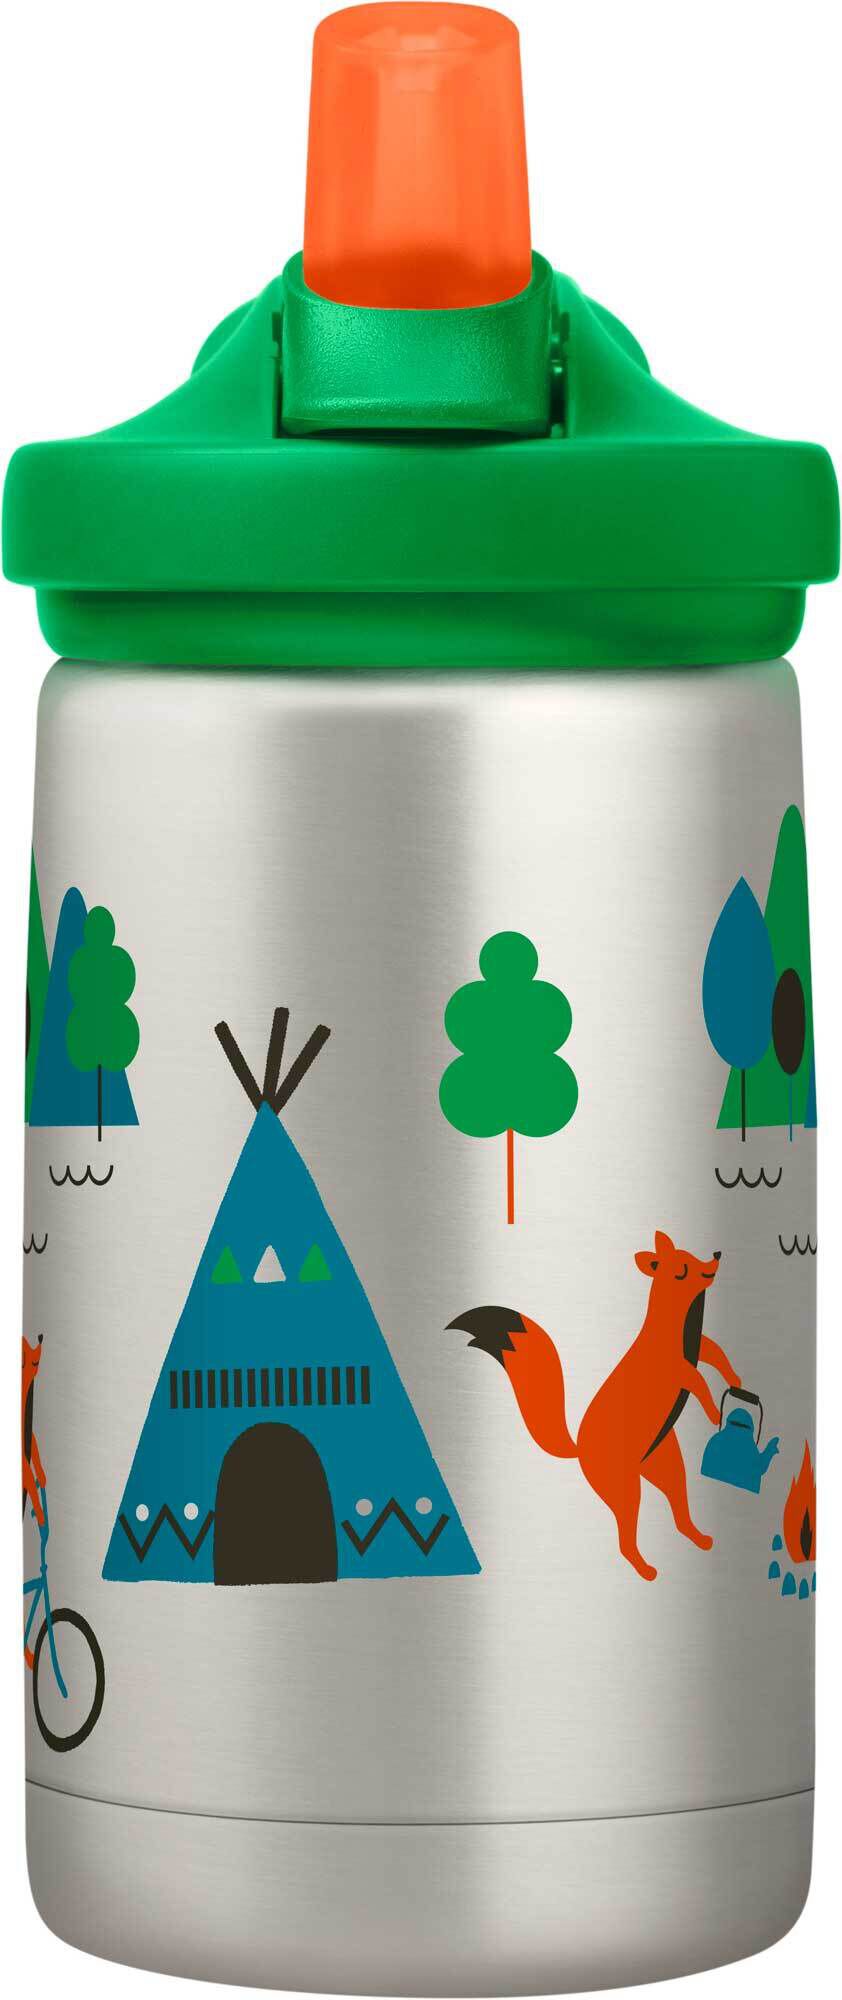 eddy®+ Kids 12 oz Bottle, Insulated Stainless Steel